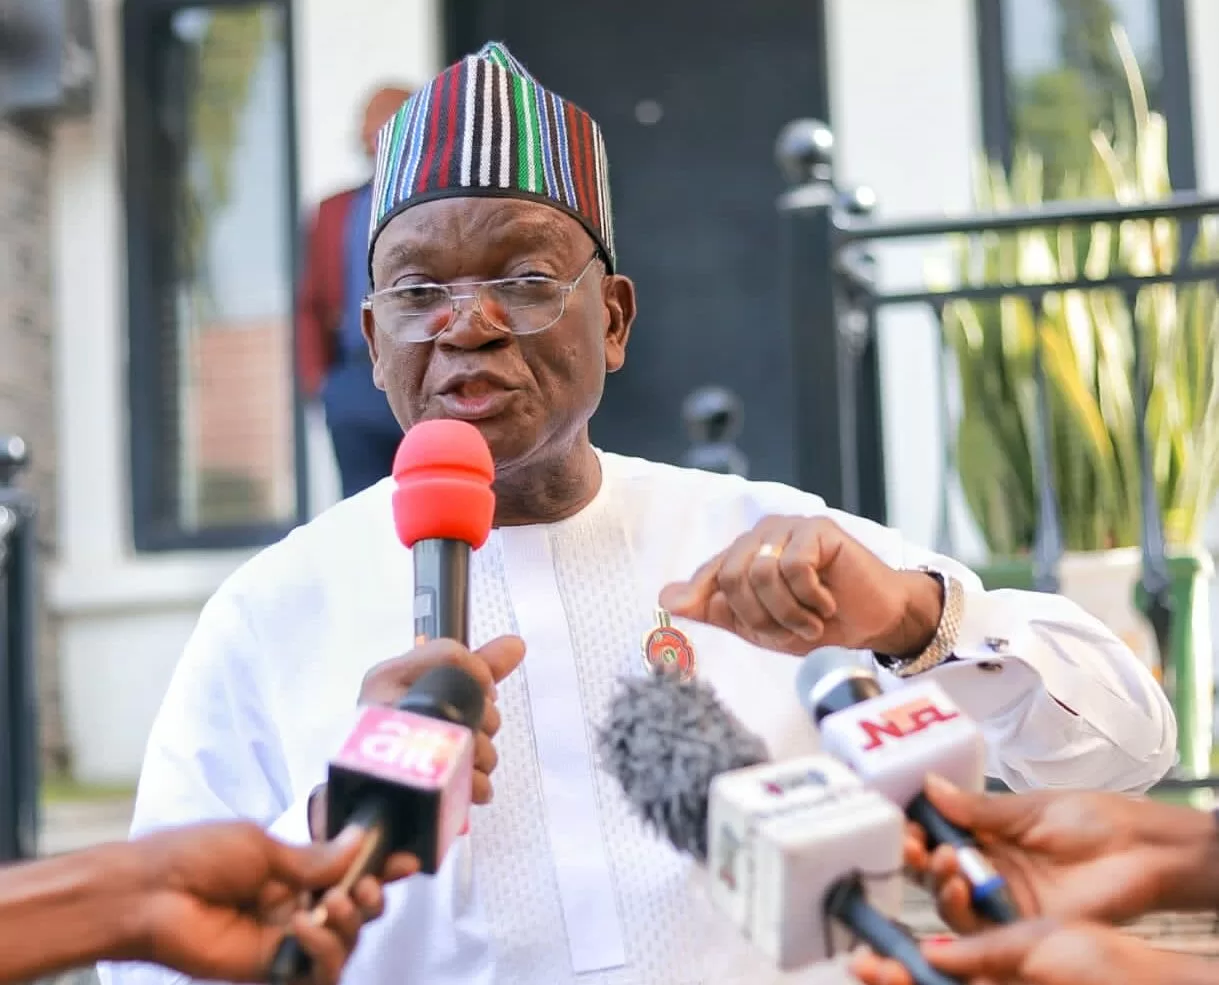 The Benue government has stopped enforcing its anti-open grazing law.